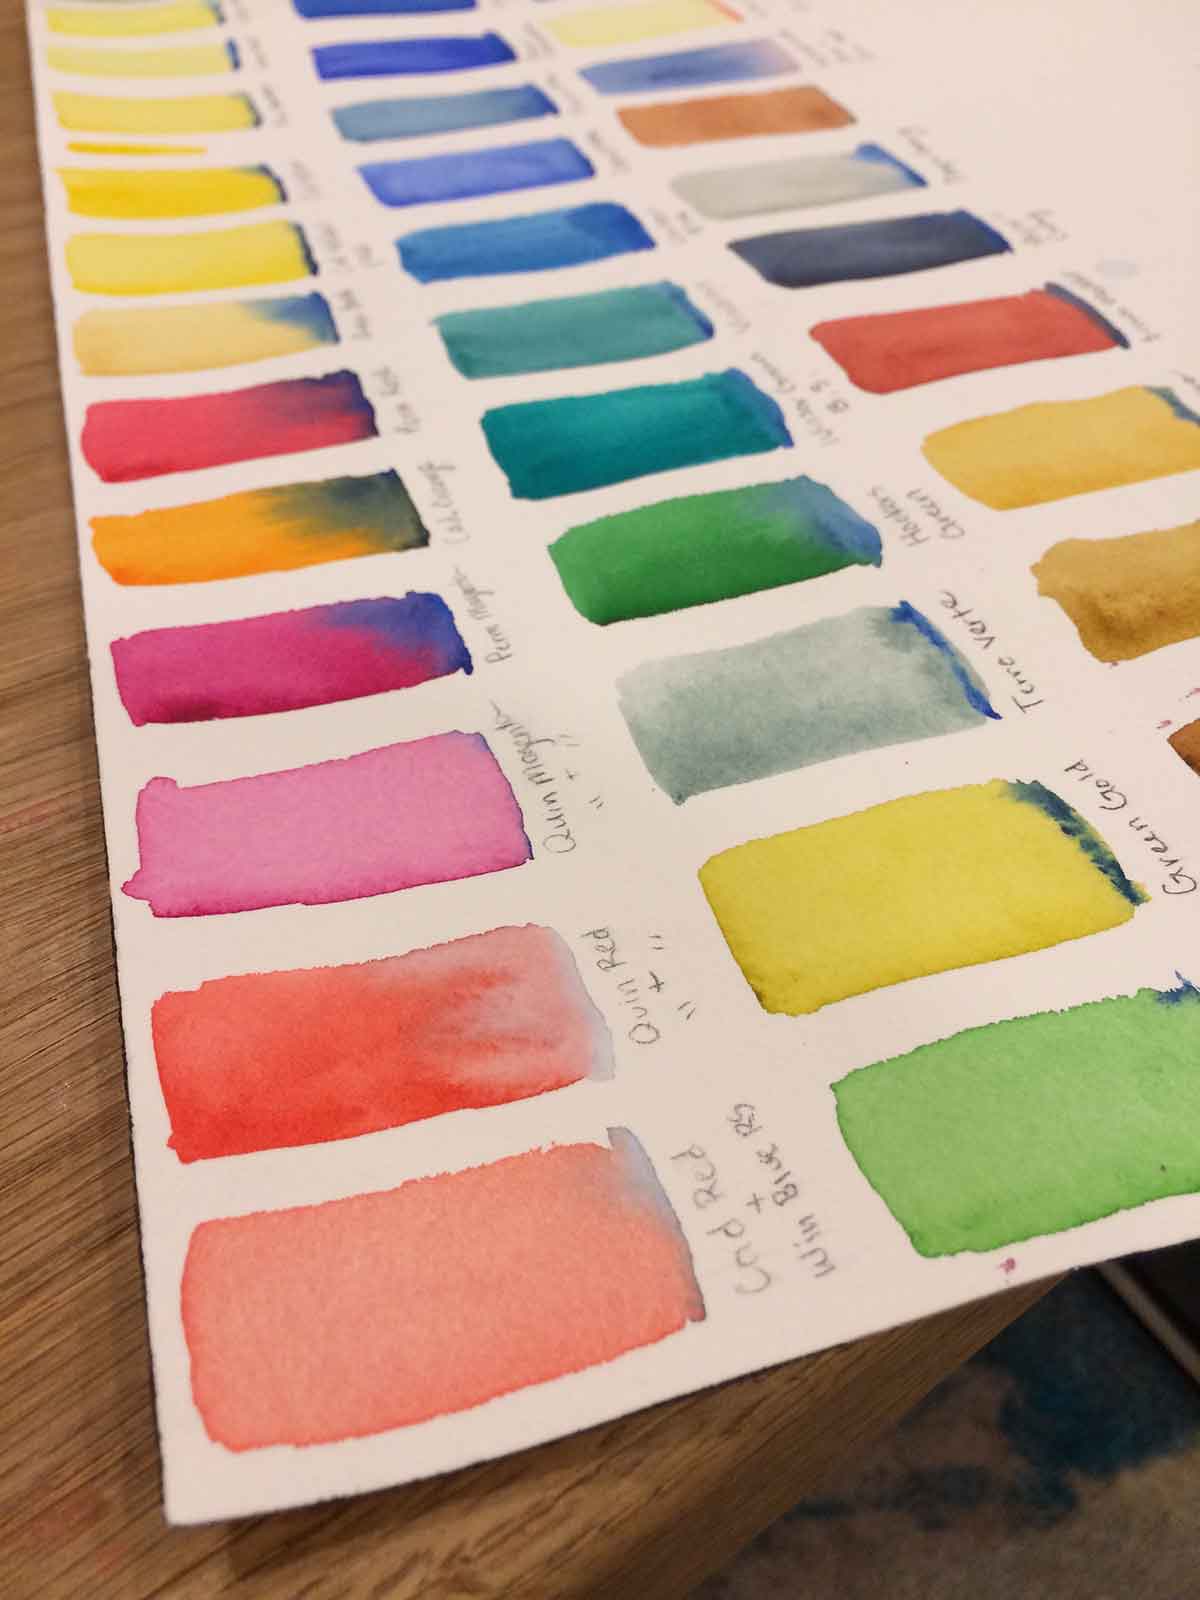 Photograph showing watercolor swatch test